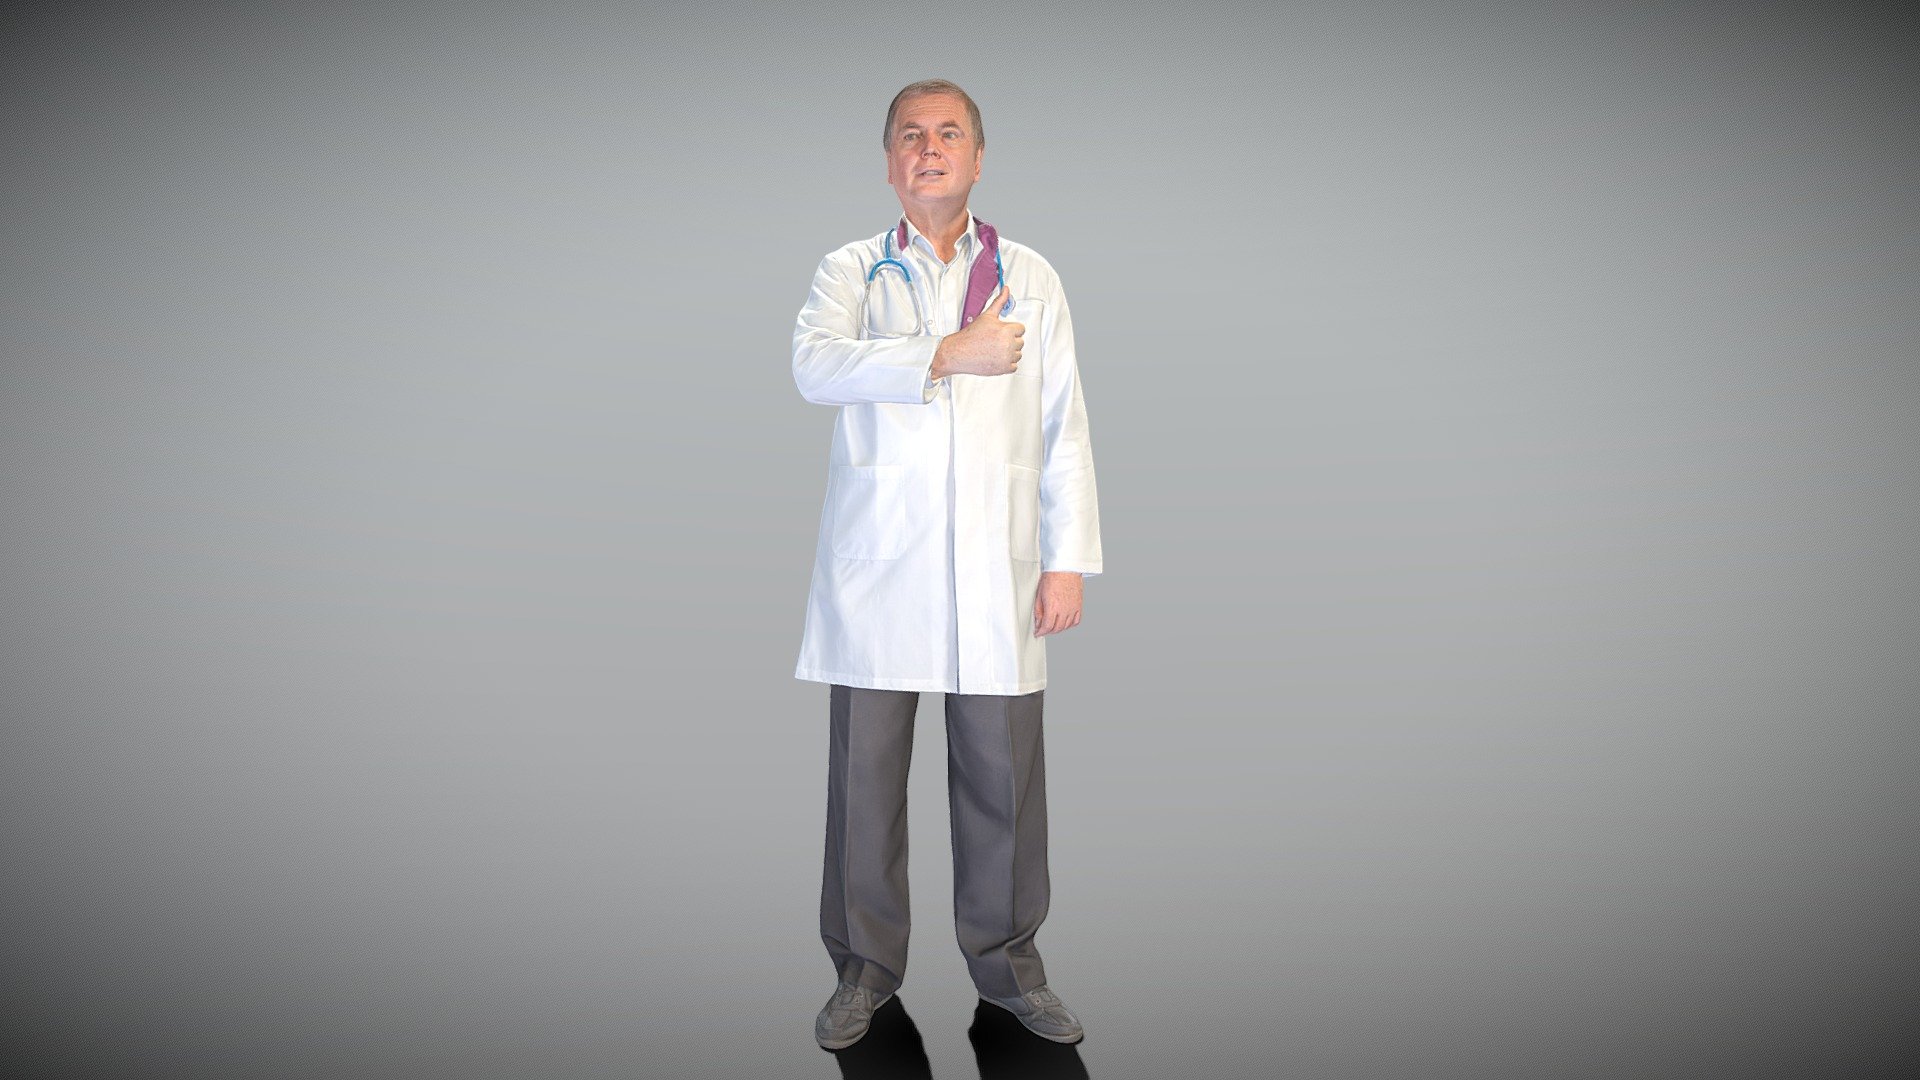 This is a true human size and detailed model of a mature man of Caucasian appearance dressed in a medical uniform. The model is captured in typical professional pose to perfectly match a variety of architectural and product visualizations, be used as a background or mid-sized character in advert banners, professional products/devices presentations, educational tutorials, VR/AR content, etc.

Technical specifications:




digital double 3d scan model

150k &amp; 30k triangles | double triangulated

high-poly model (.ztl tool with 4-5 subdivisions) clean and retopologized automatically via ZRemesher

sufficiently clean

PBR textures 8K resolution: Diffuse, Normal, Specular maps

non-overlapping UV map

no extra plugins are required for this model

Download package includes a Cinema 4D project file with Redshift shader, OBJ, FBX, STL files, which are applicable for 3ds Max, Maya, Unreal Engine, Unity, Blender, etc.

3D EVERYTHING

Stand with Ukraine! - Mature doctor with thumb up 384 - Buy Royalty Free 3D model by deep3dstudio 3d model